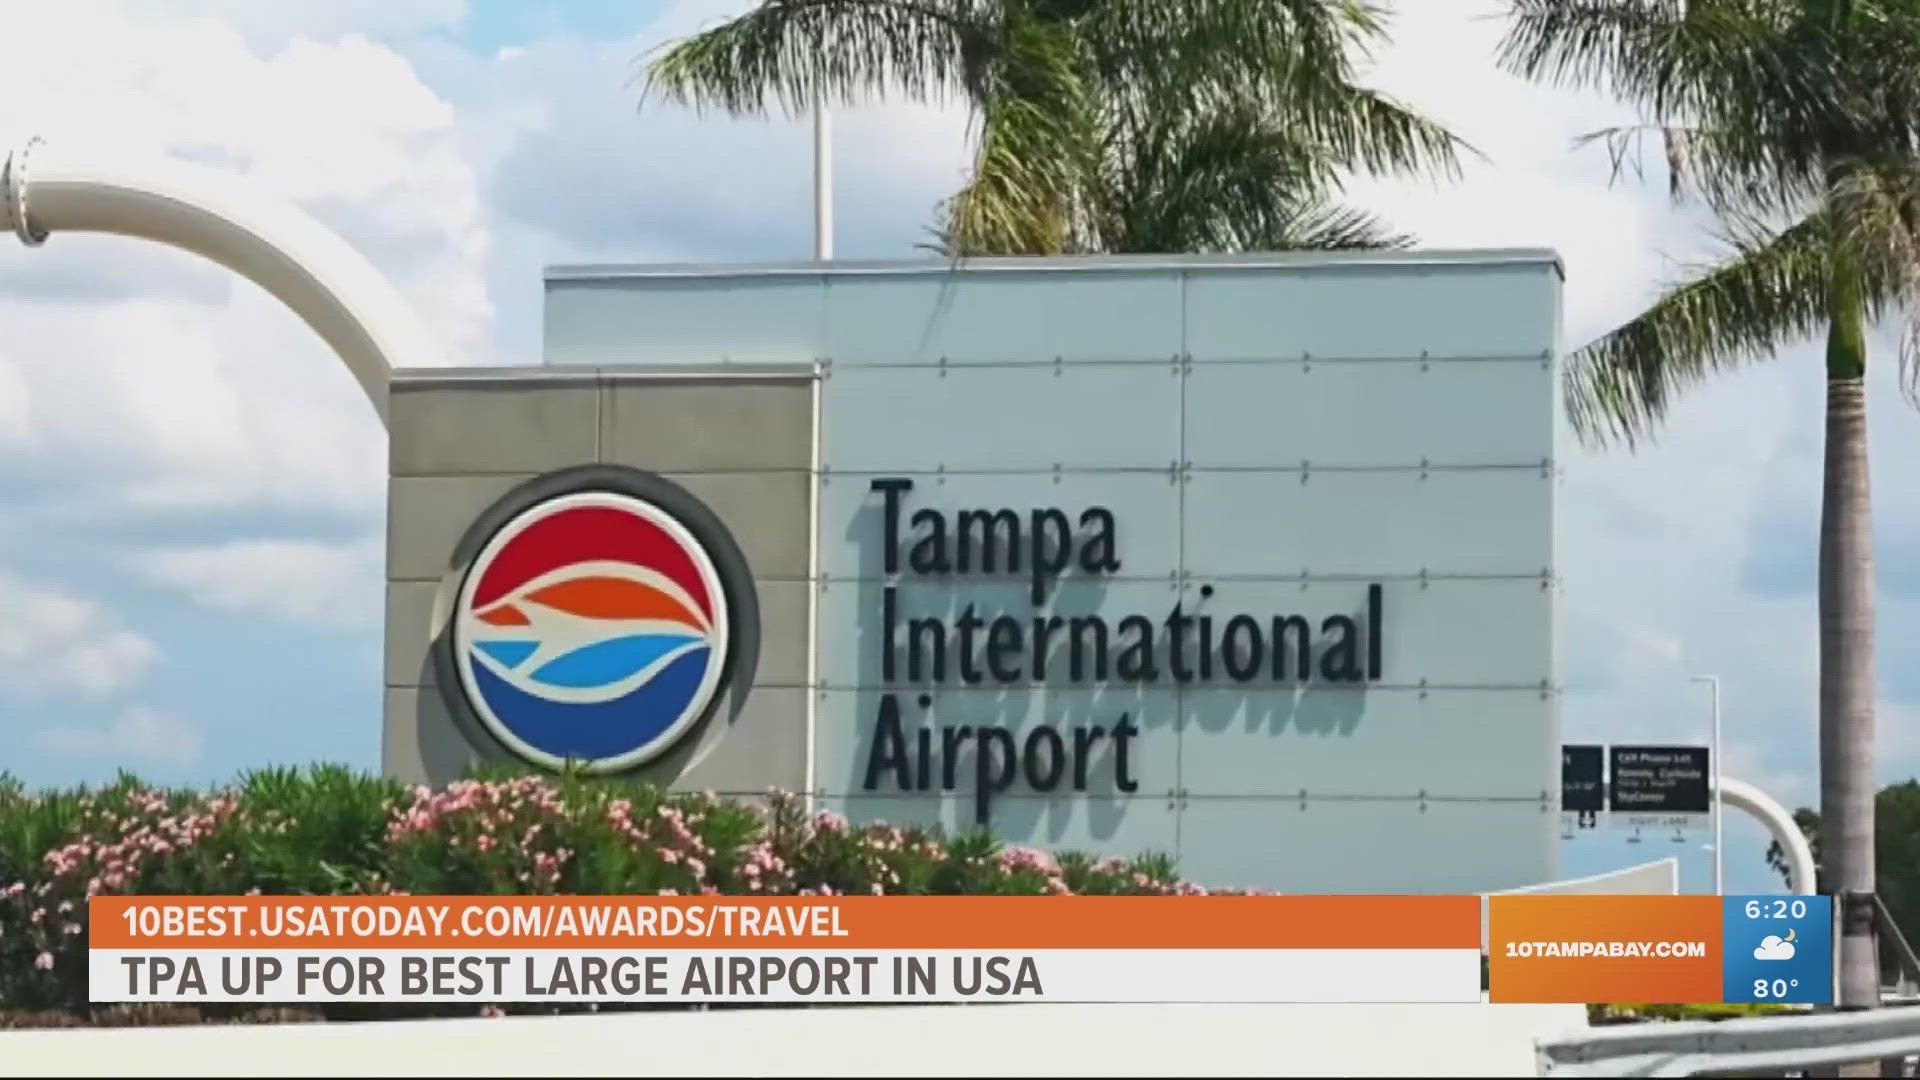 People can vote until Oct. 2 for the Tampa International Airport.